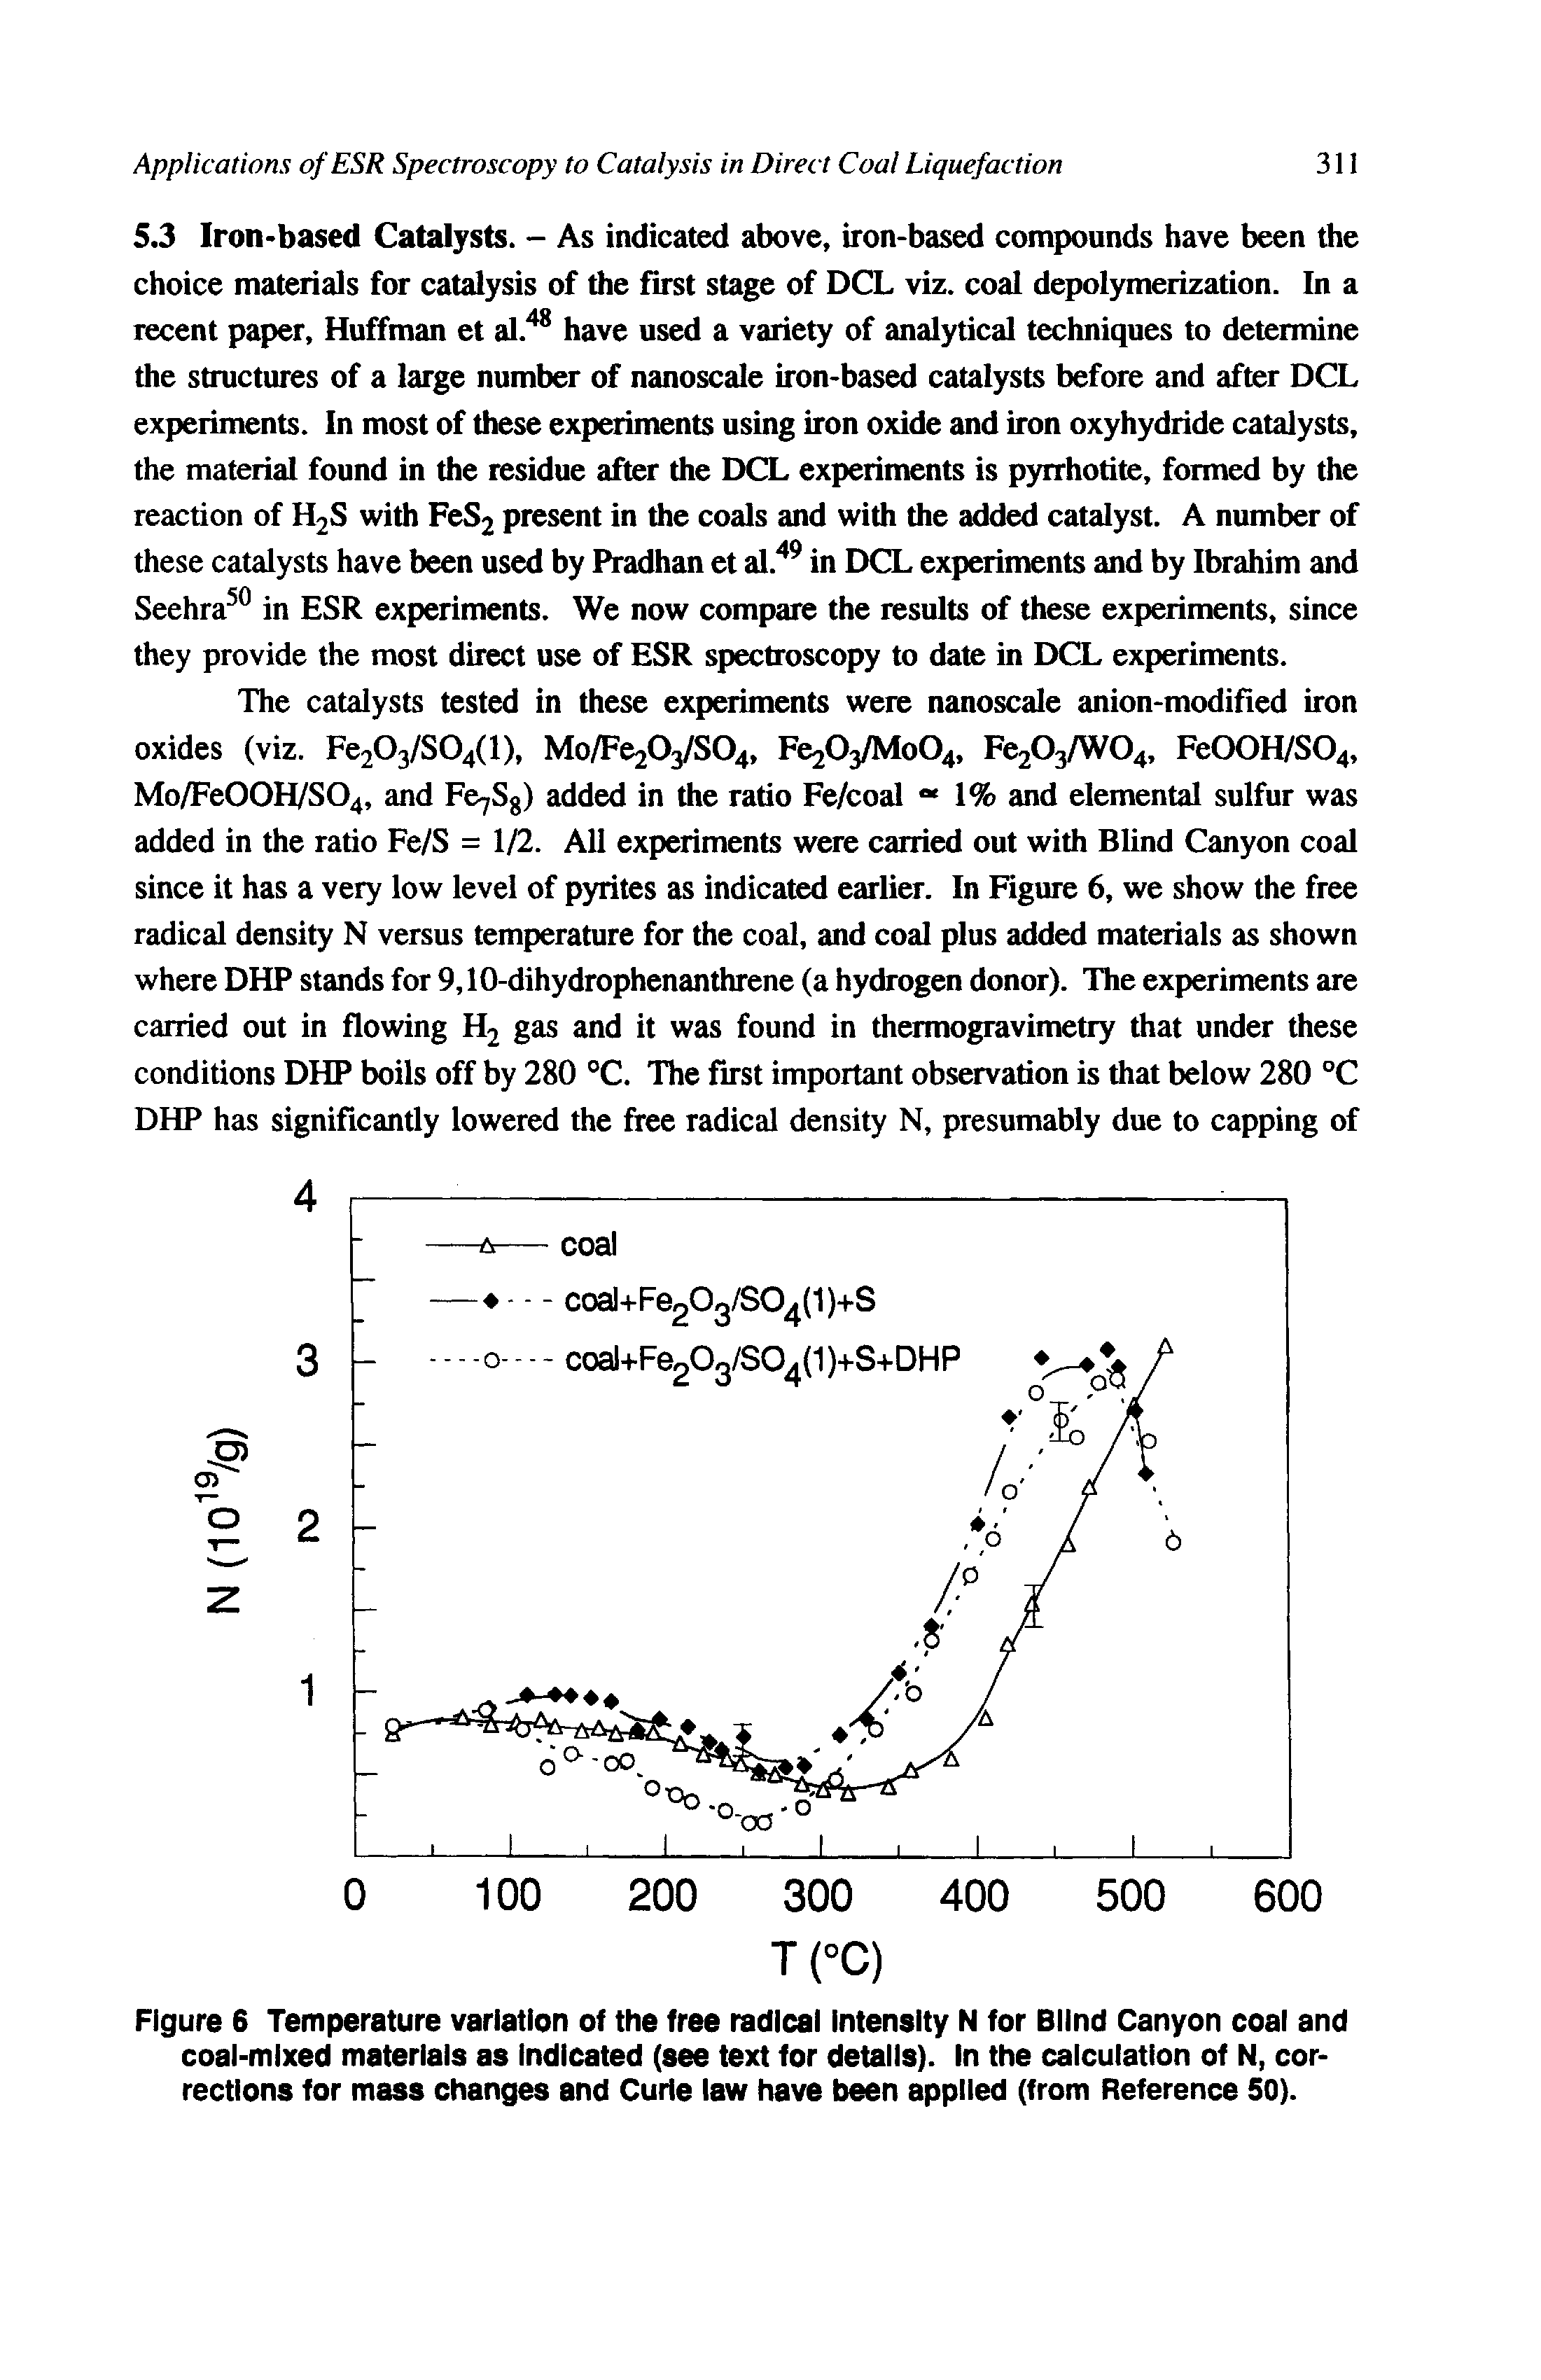 Figure 6 Temperature variation of the free radical Intensity N for Blind Canyon coal and coal-mixed materials as Indicated (see text for details). In the calculation of N, corrections for mass changes and Curie law have been applied (from Reference 50).